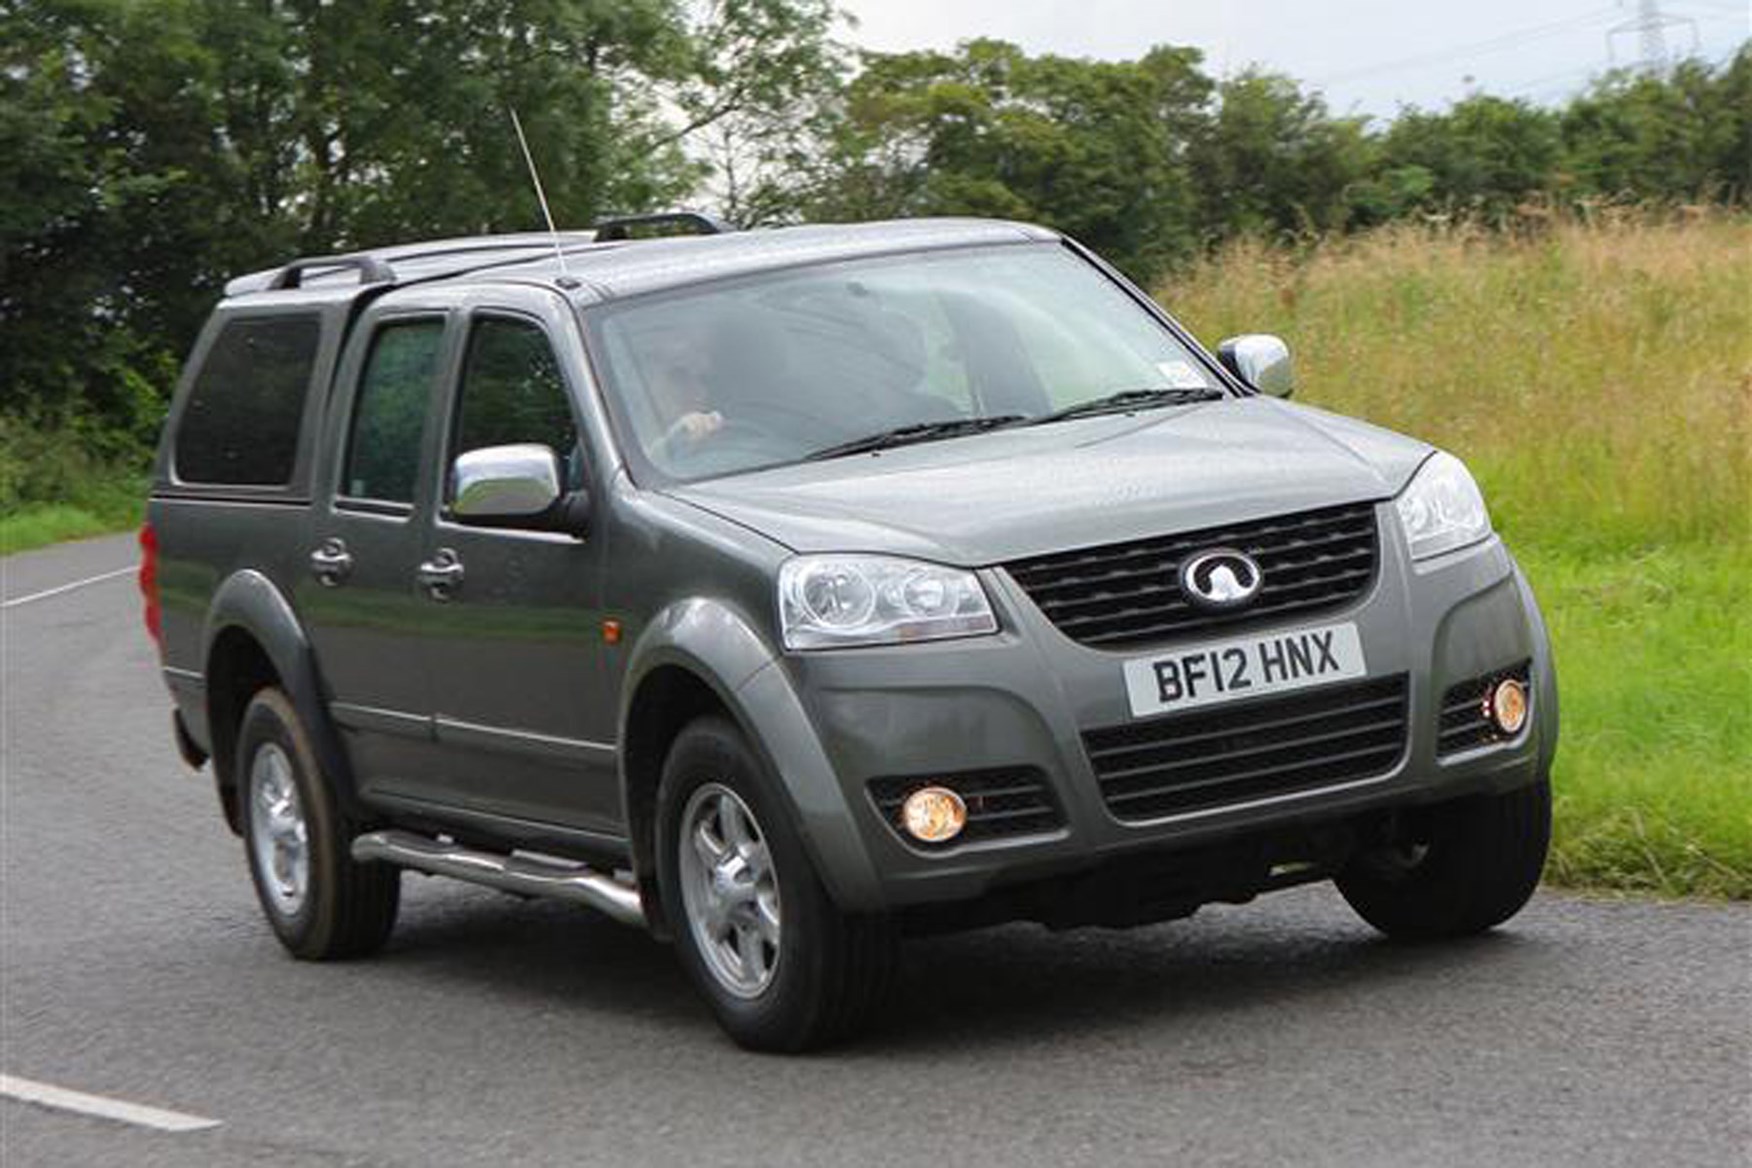 Great Wall Steed full review on Parkers Vans - on the road